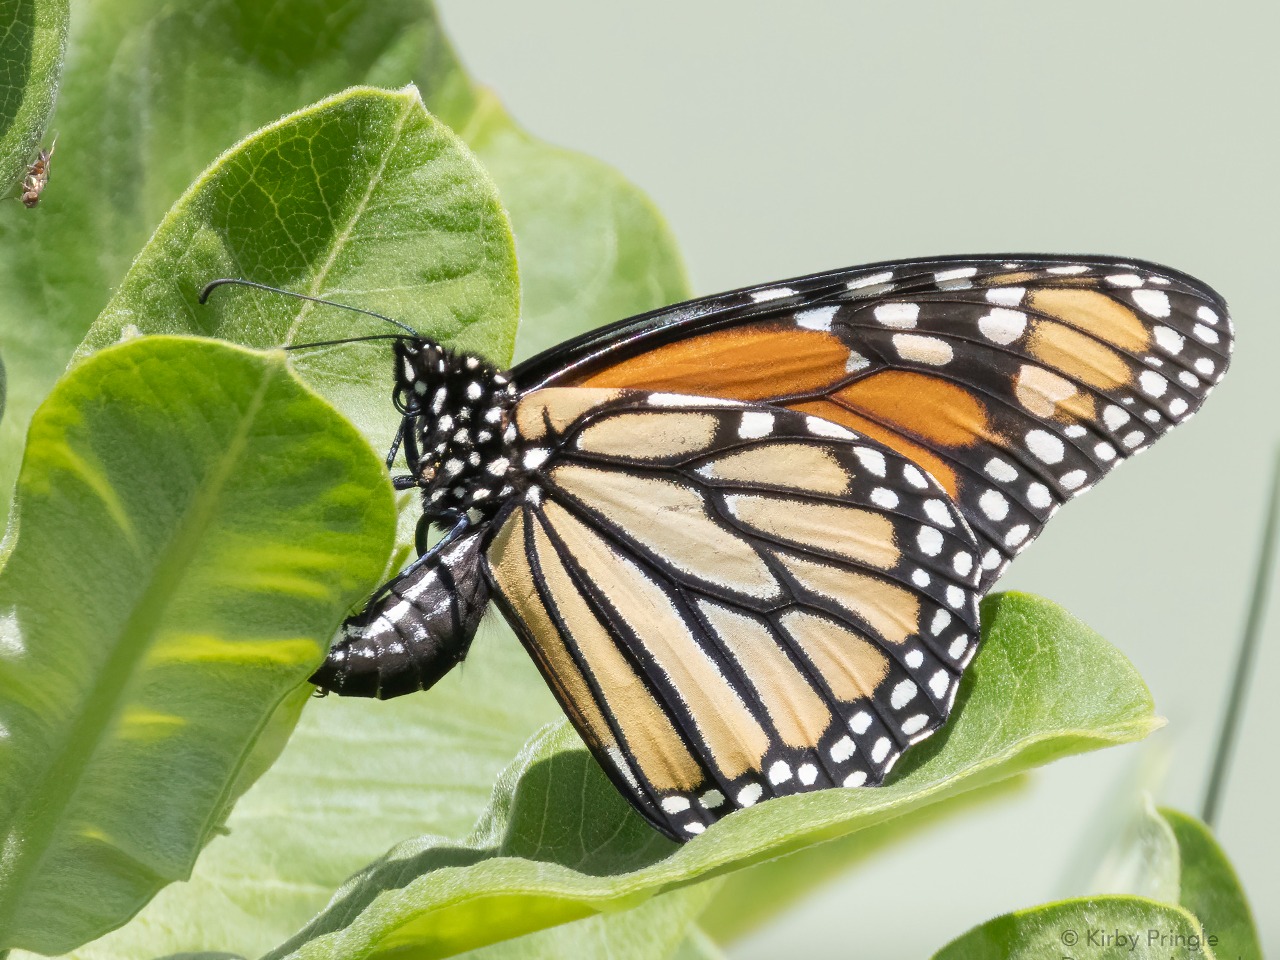 A close-up side view of a monarch butterfly 